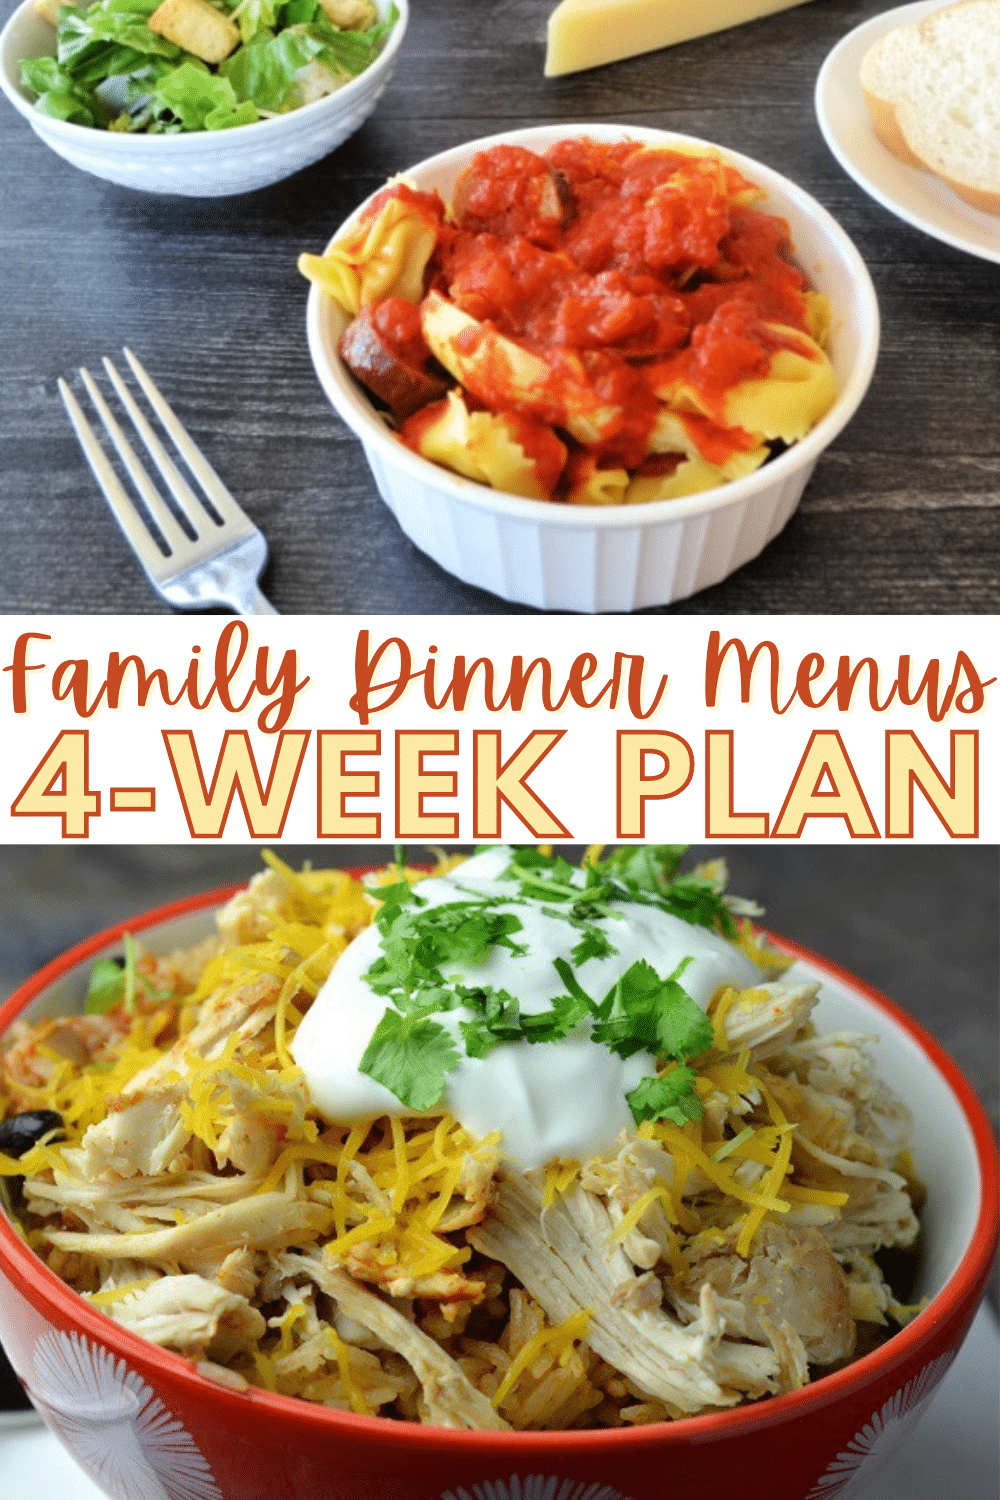 4 full weeks of dinner ideas that are family-friendly and kid-approved. Plus, helpful tips to put meal planning and grocery shopping on autopilot so this dreaded chore is one that will only take seconds to do! #dinnerideas #mealplan #familyfriendlyrecipes via @wondermomwannab